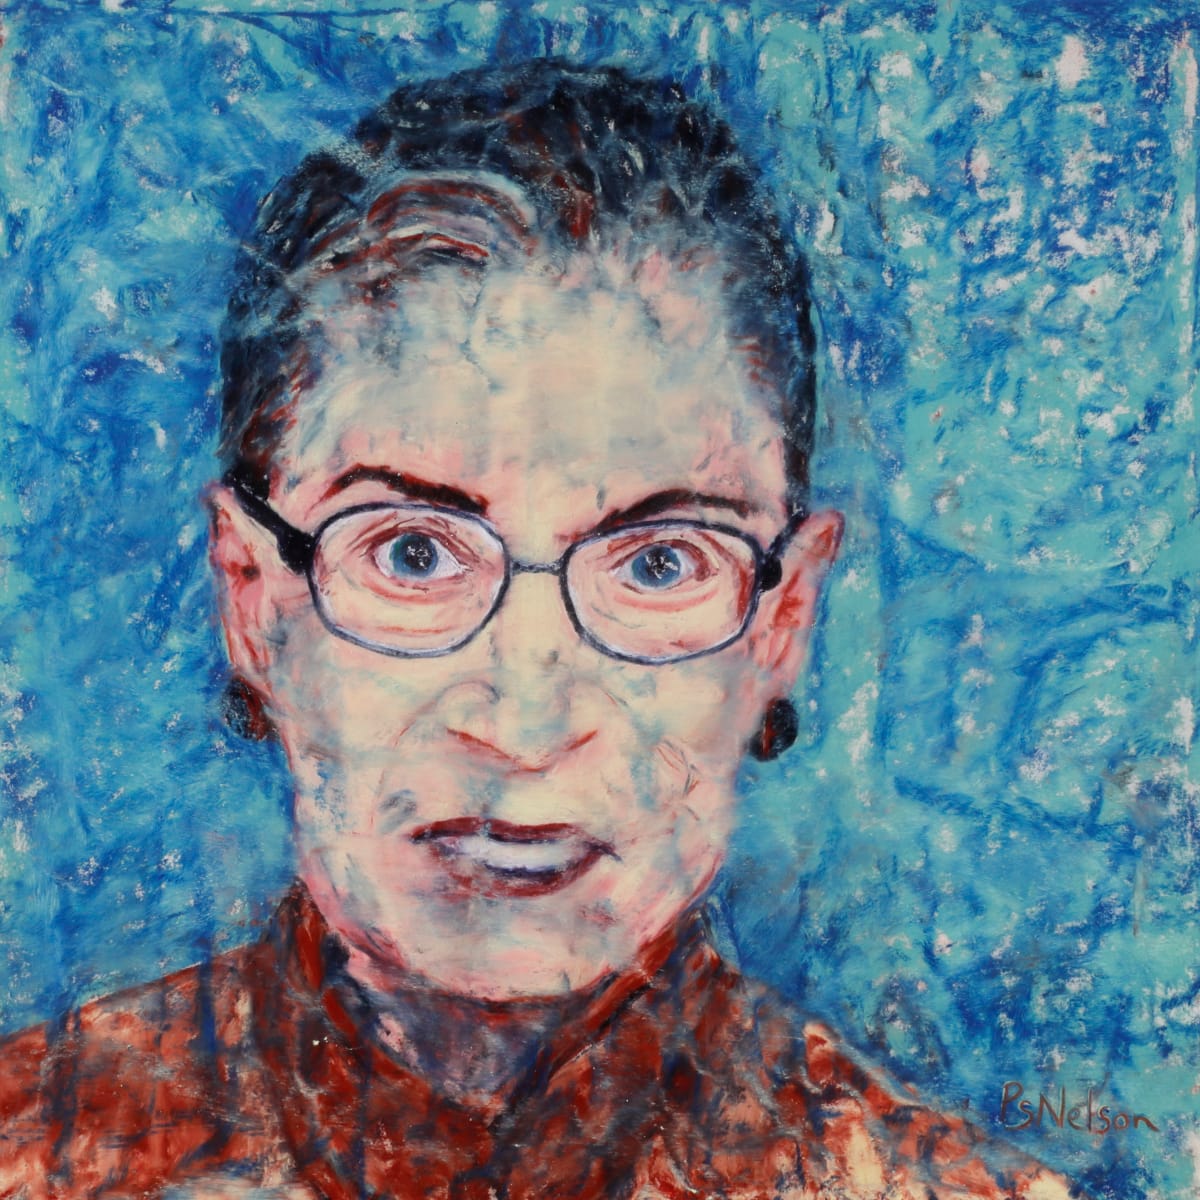 Supreme (aka "The Notorious RBG") by PS Nelson  Image: Ruth Bader Ginsburg